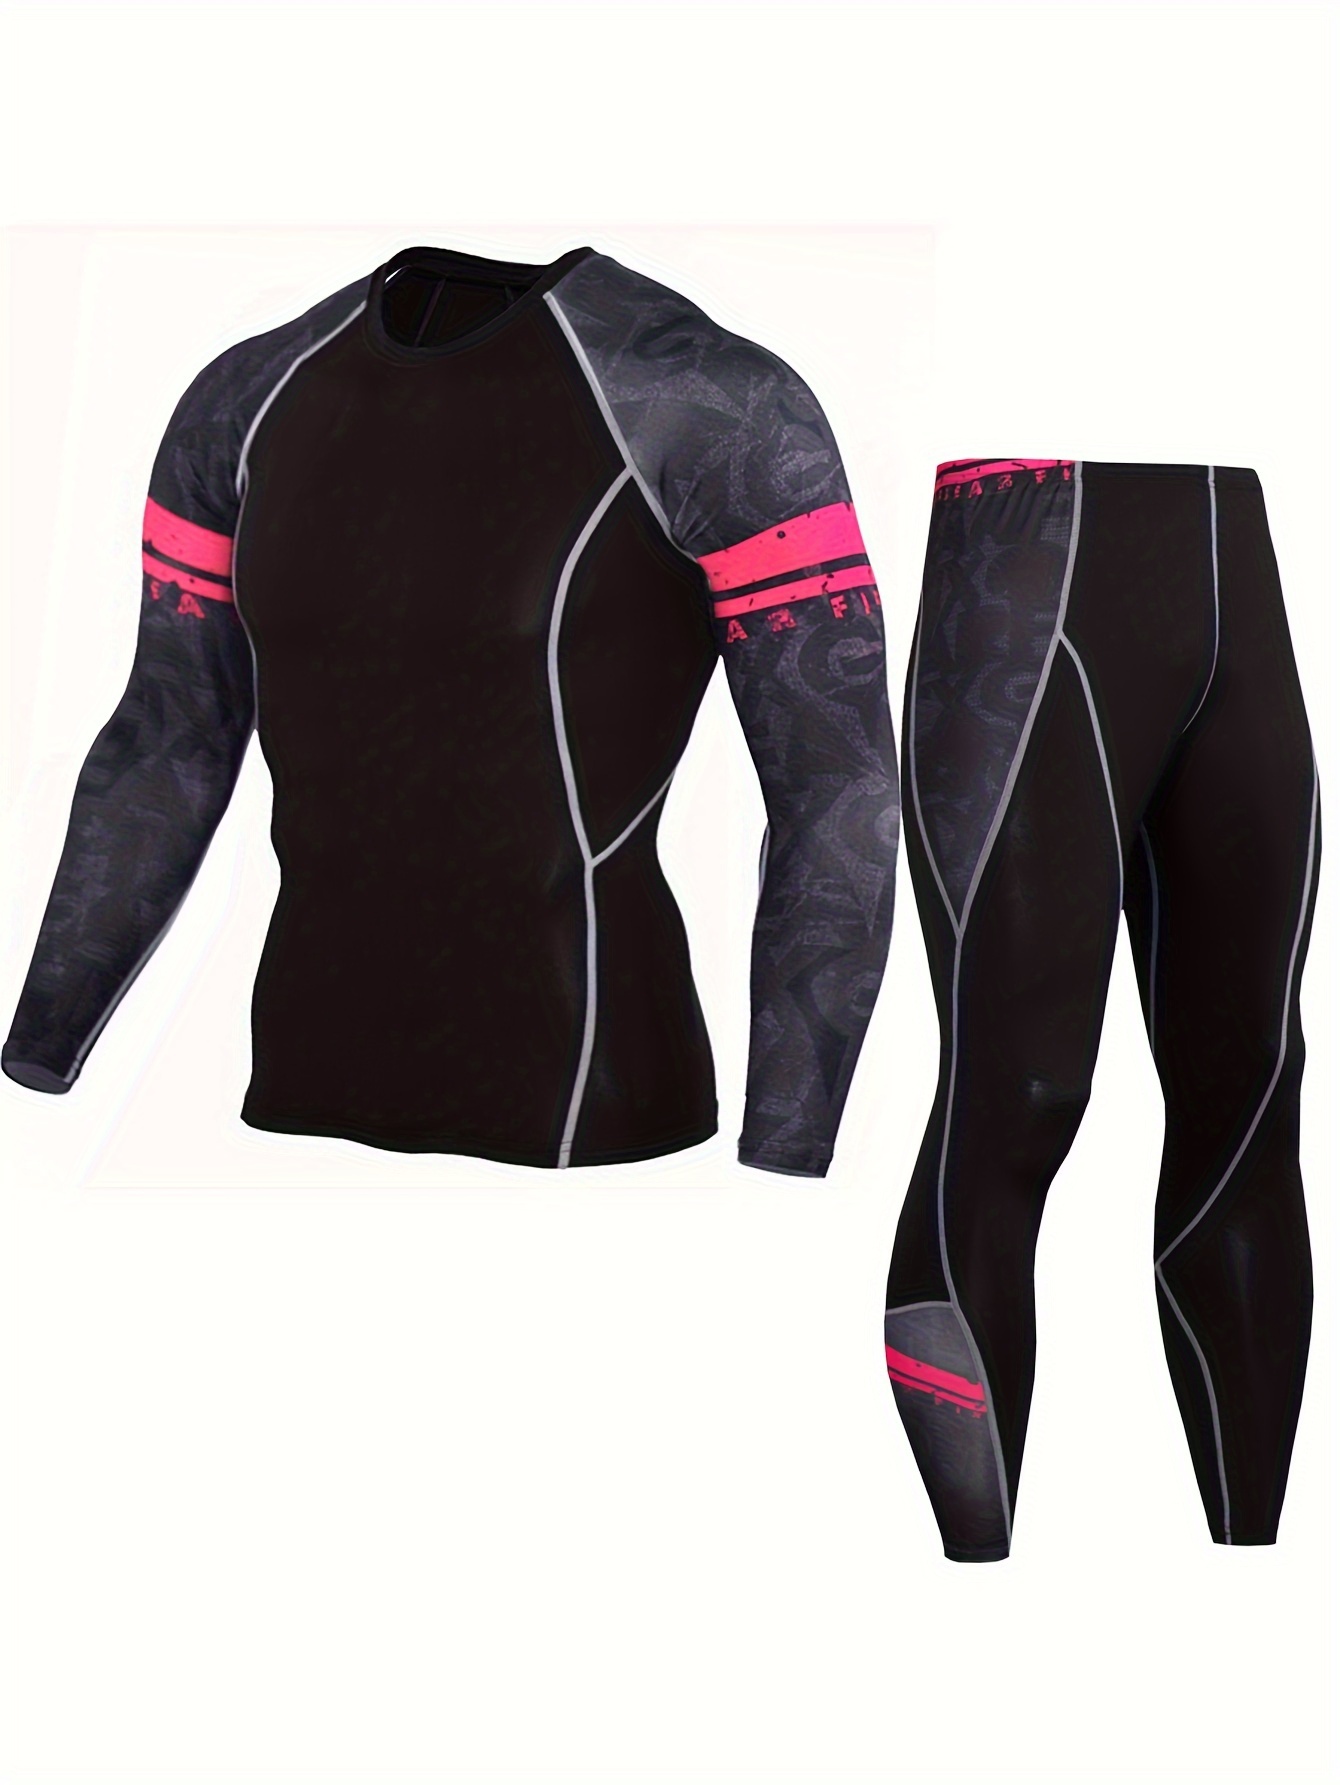 Men's Sports Running Set Compression Shirt + Pants Skin-Tight Long Sleeves  Quick Dry Fitness Tracksuit Gym Yoga Suits 